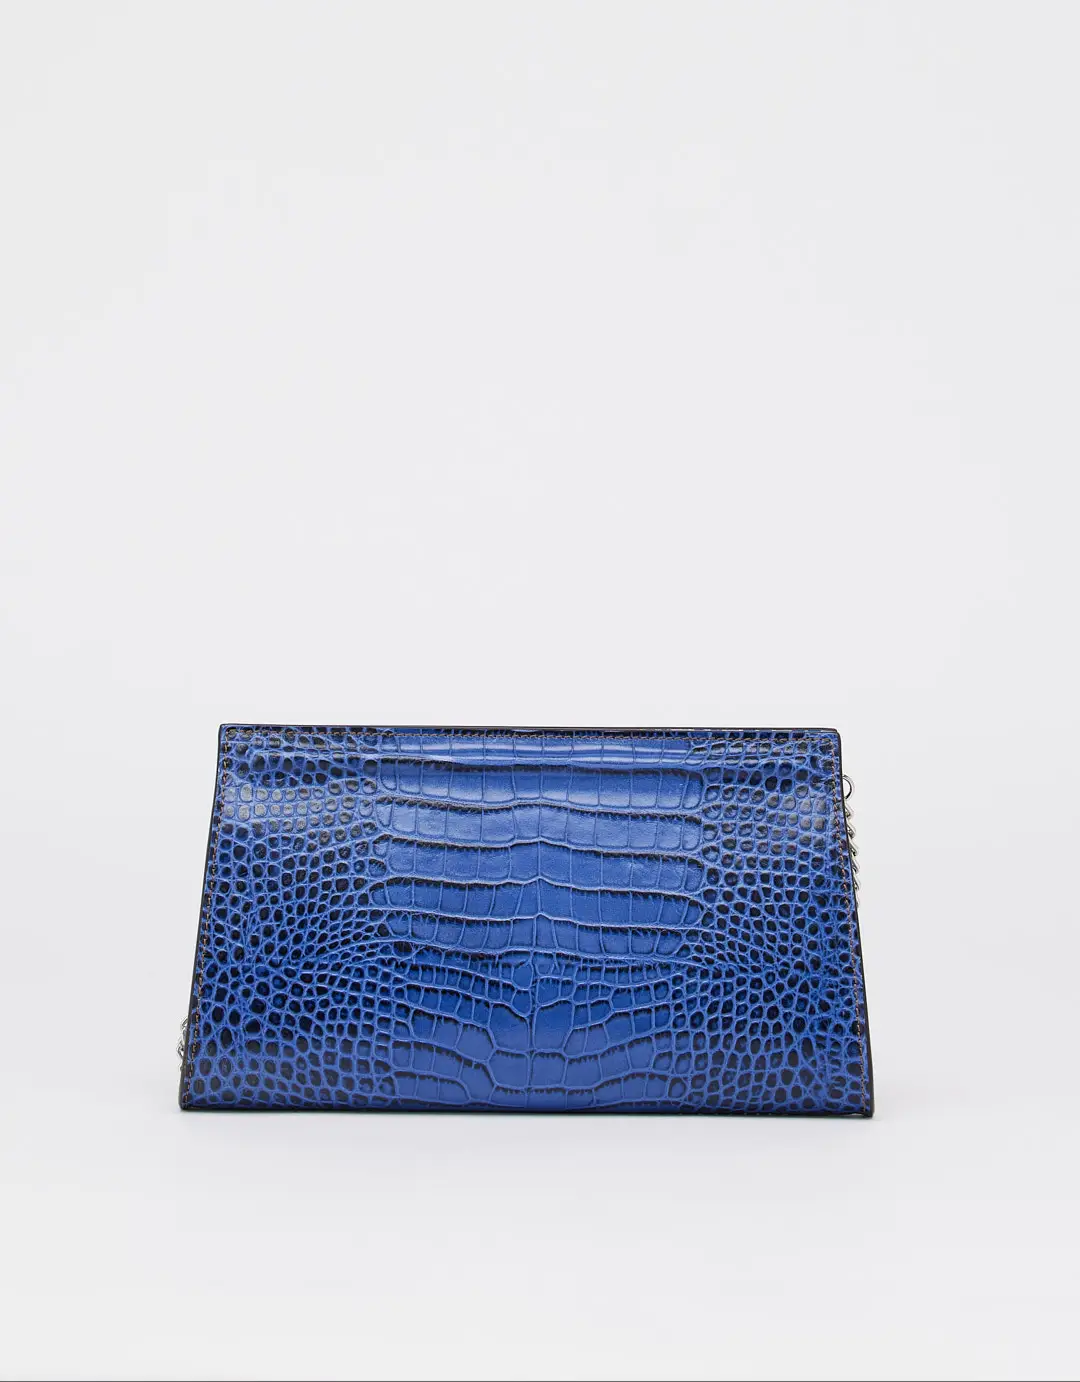 Looking for a small clutch for a date night? Want to downsize your large, bulky purse yet, still leave enough room for the essentials? This leather clutch bag is the ideal companion for a night out of town. The mosaic on the sides adds a touch of both luxury and elegance, and the Croco always gives the impression that you are wearing something valuable, while the leather construction ensures durability. The clutch is large enough to fit your essentials yet, small enough to be easily carried.